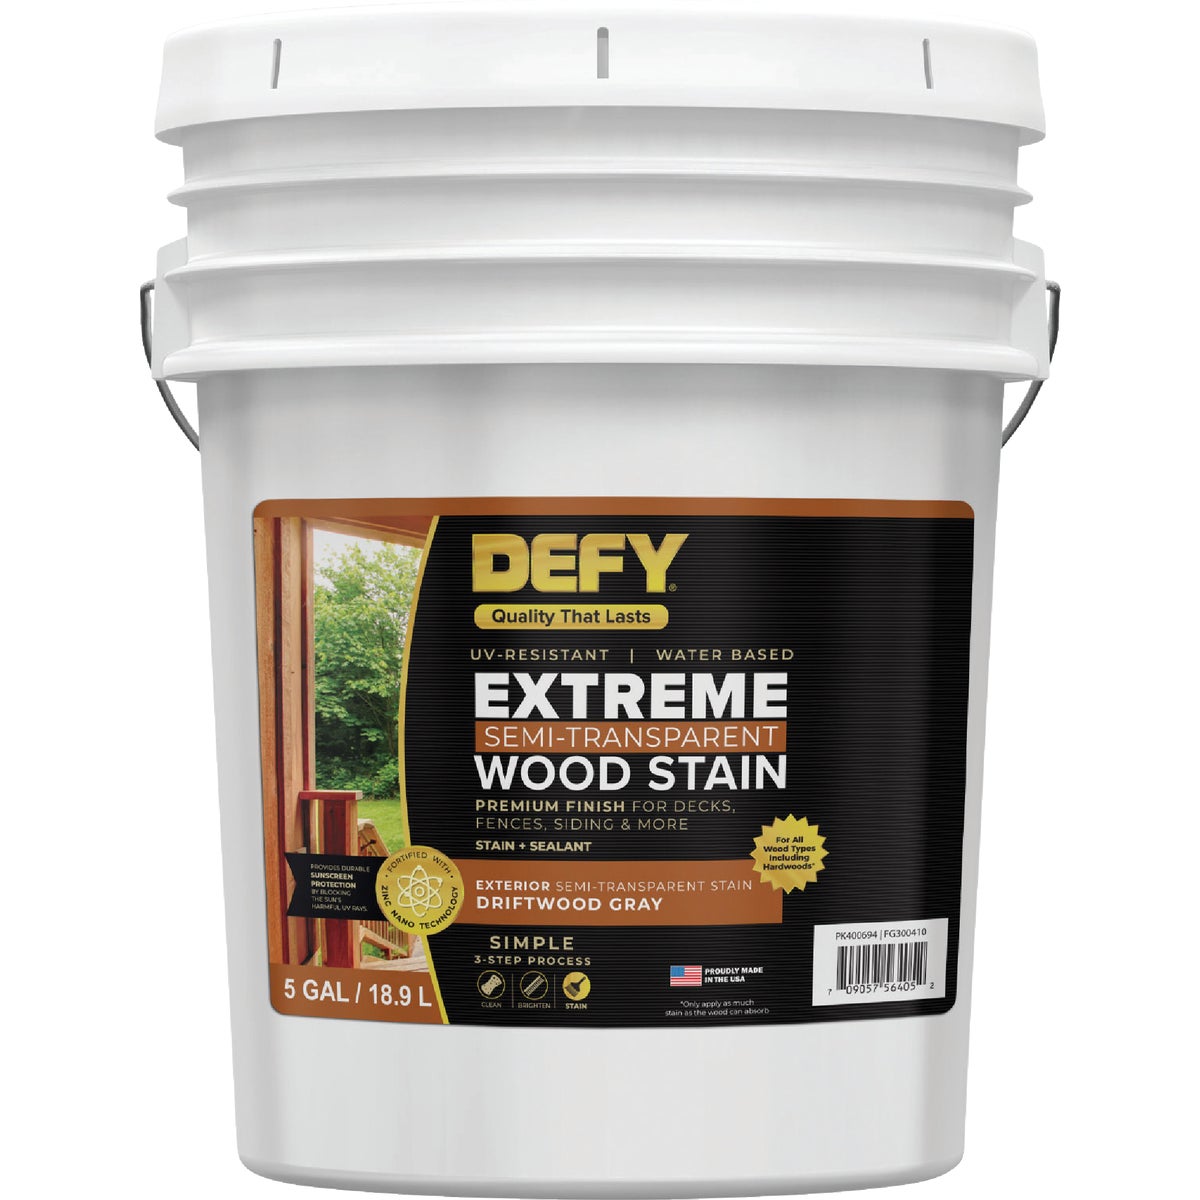 DEFY Extreme Semi-Transparent Exterior Wood Stain, Driftwood Gray, 5 Gal.